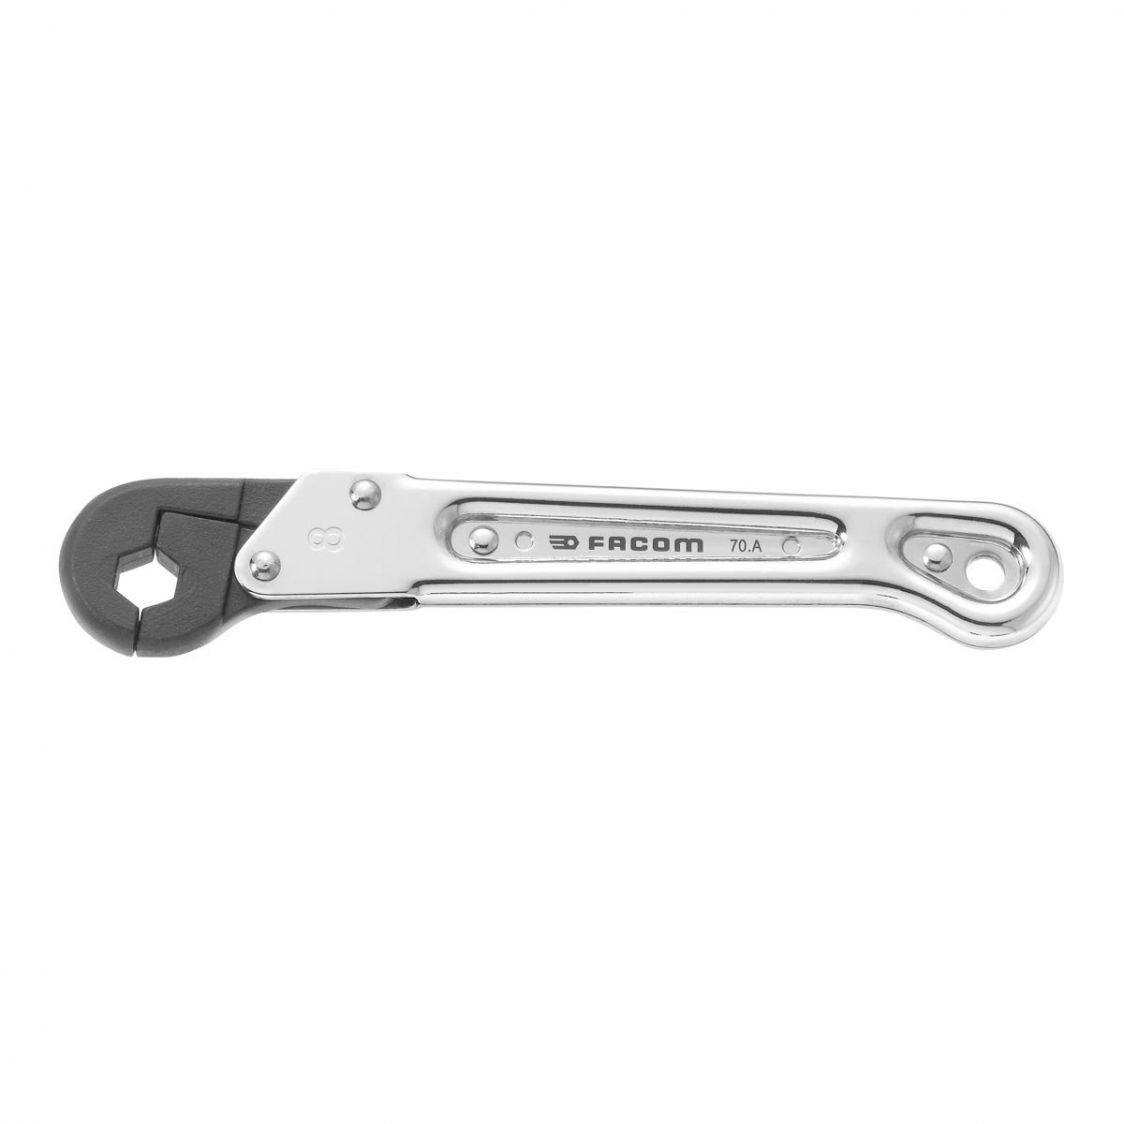 FACOM 70A.11 - 11mm Metric Ratchet Flare Nut Spanner